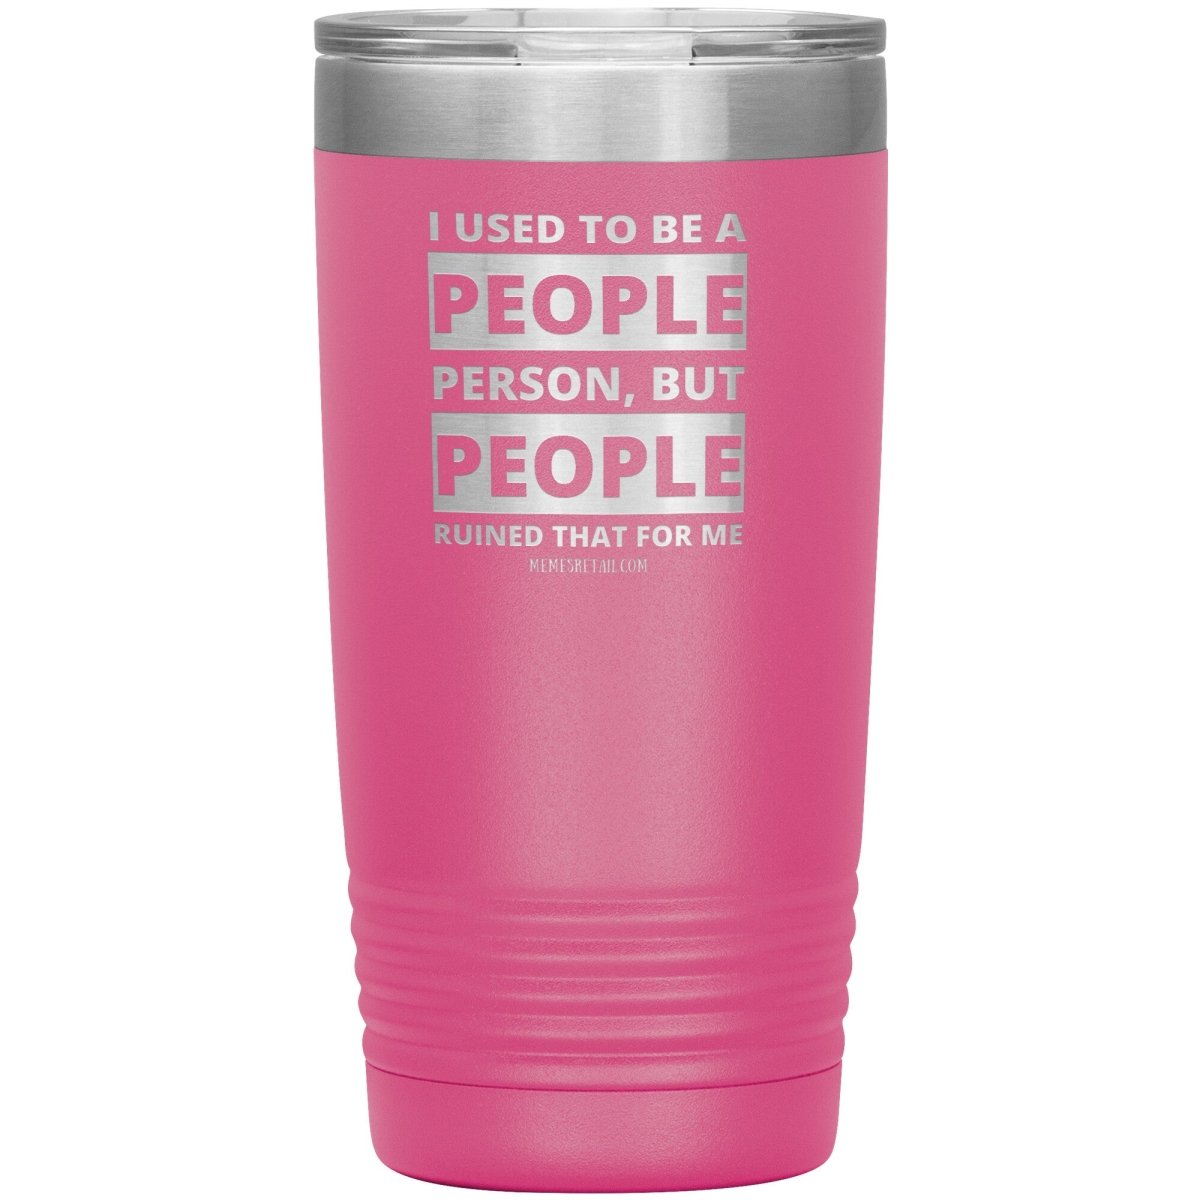 I Used To Be A People Person, But People Ruined That For Me Tumblers, 20oz Insulated Tumbler / Pink - MemesRetail.com